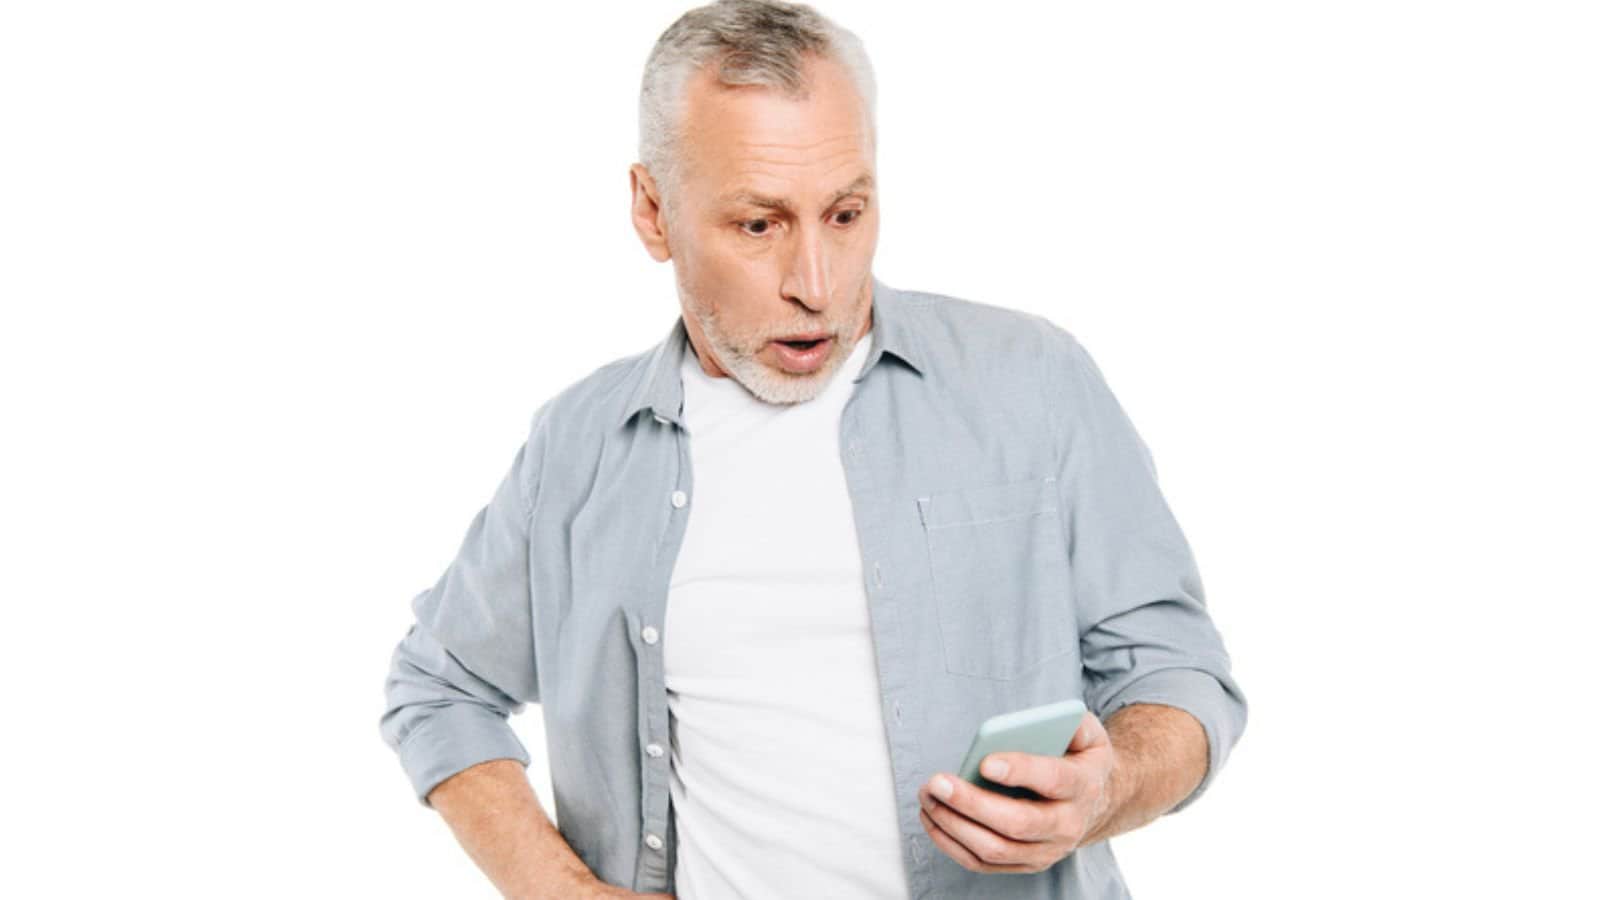 Shocked man with smartphone